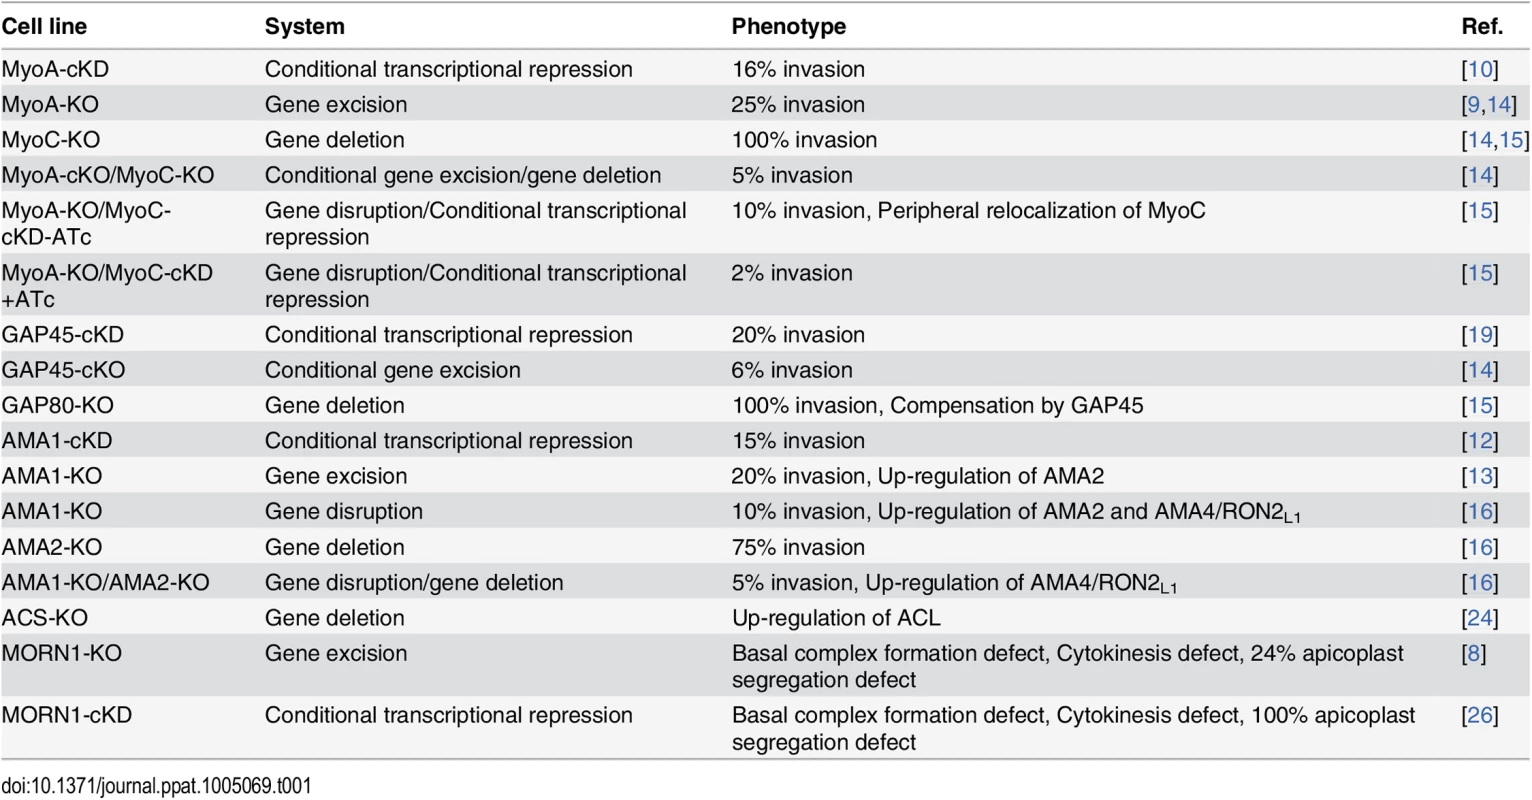 Summary of the phenotype and adaptation observed in the cell lines discussed in this review according to the technology used to investigate the function of the corresponding gene.